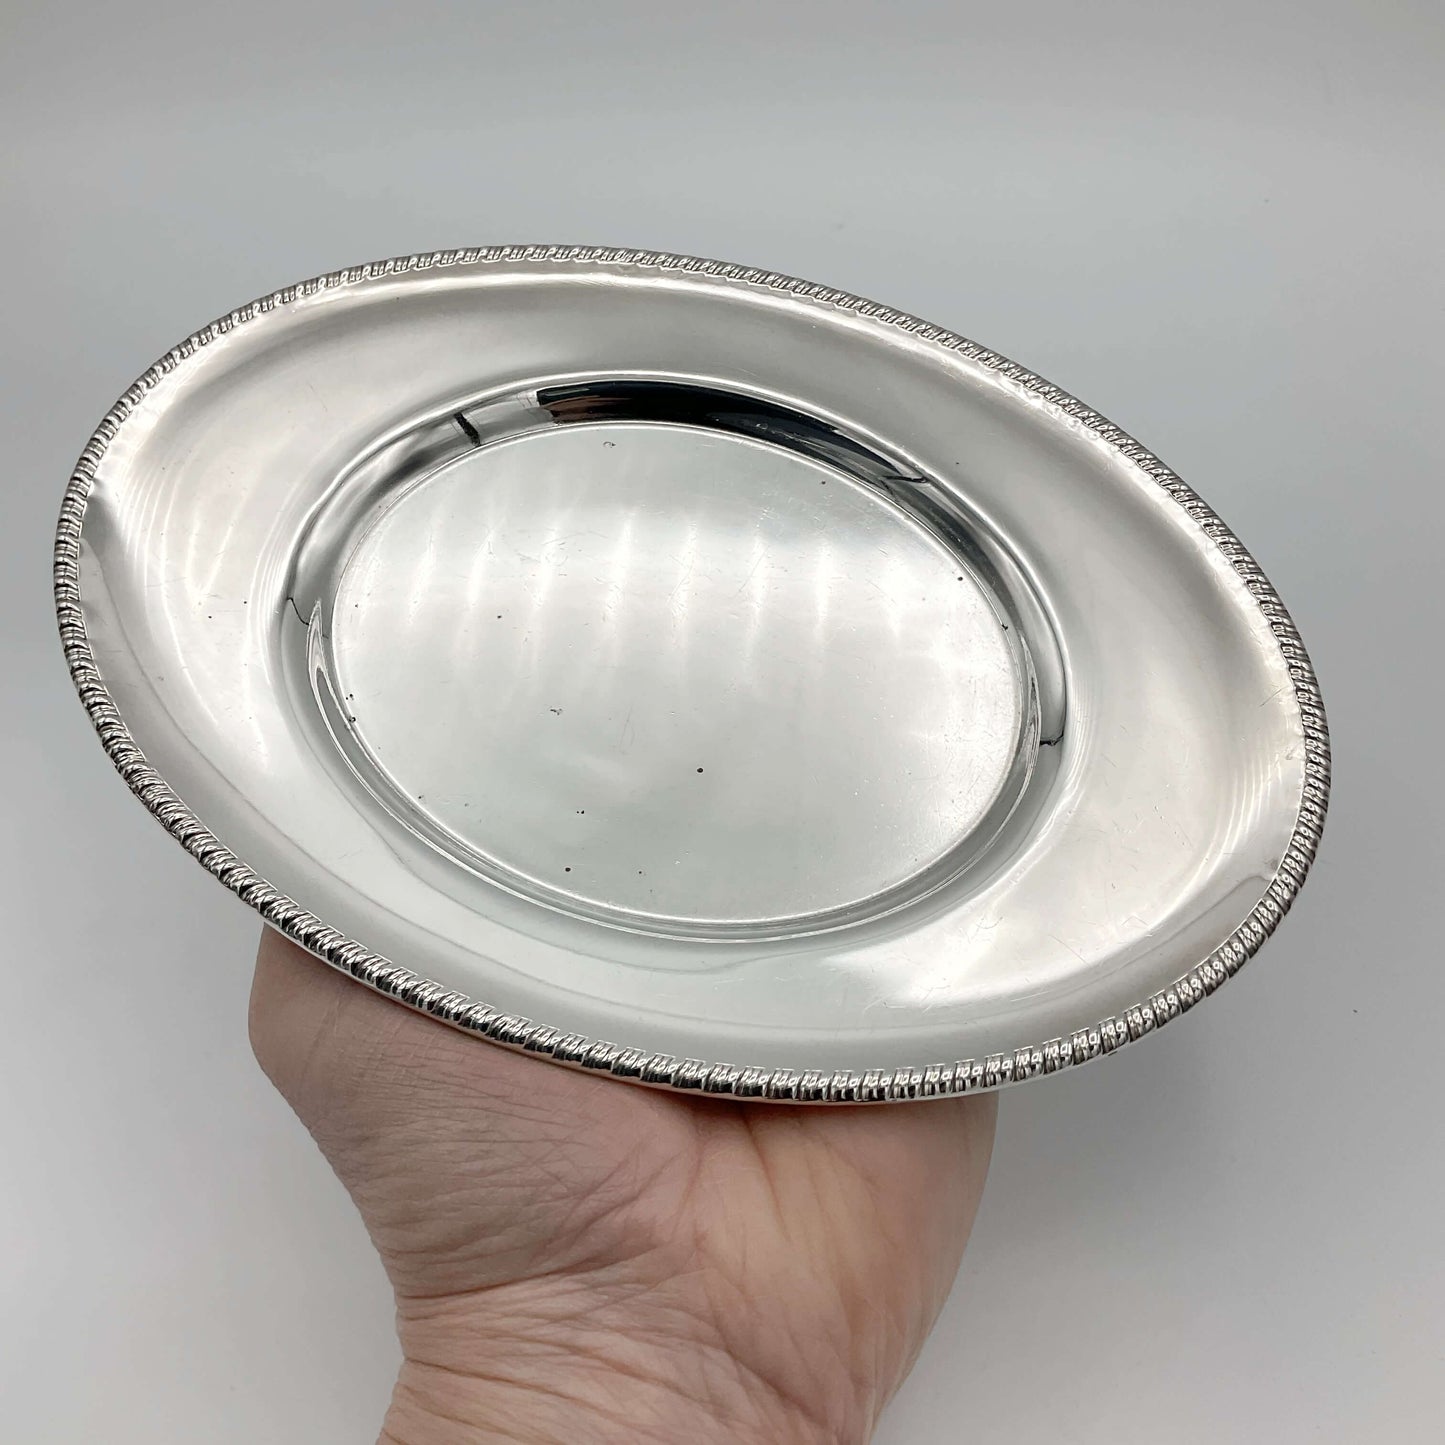 A beautiful shiny silver plated serving tray or platter held on a hand on a white background